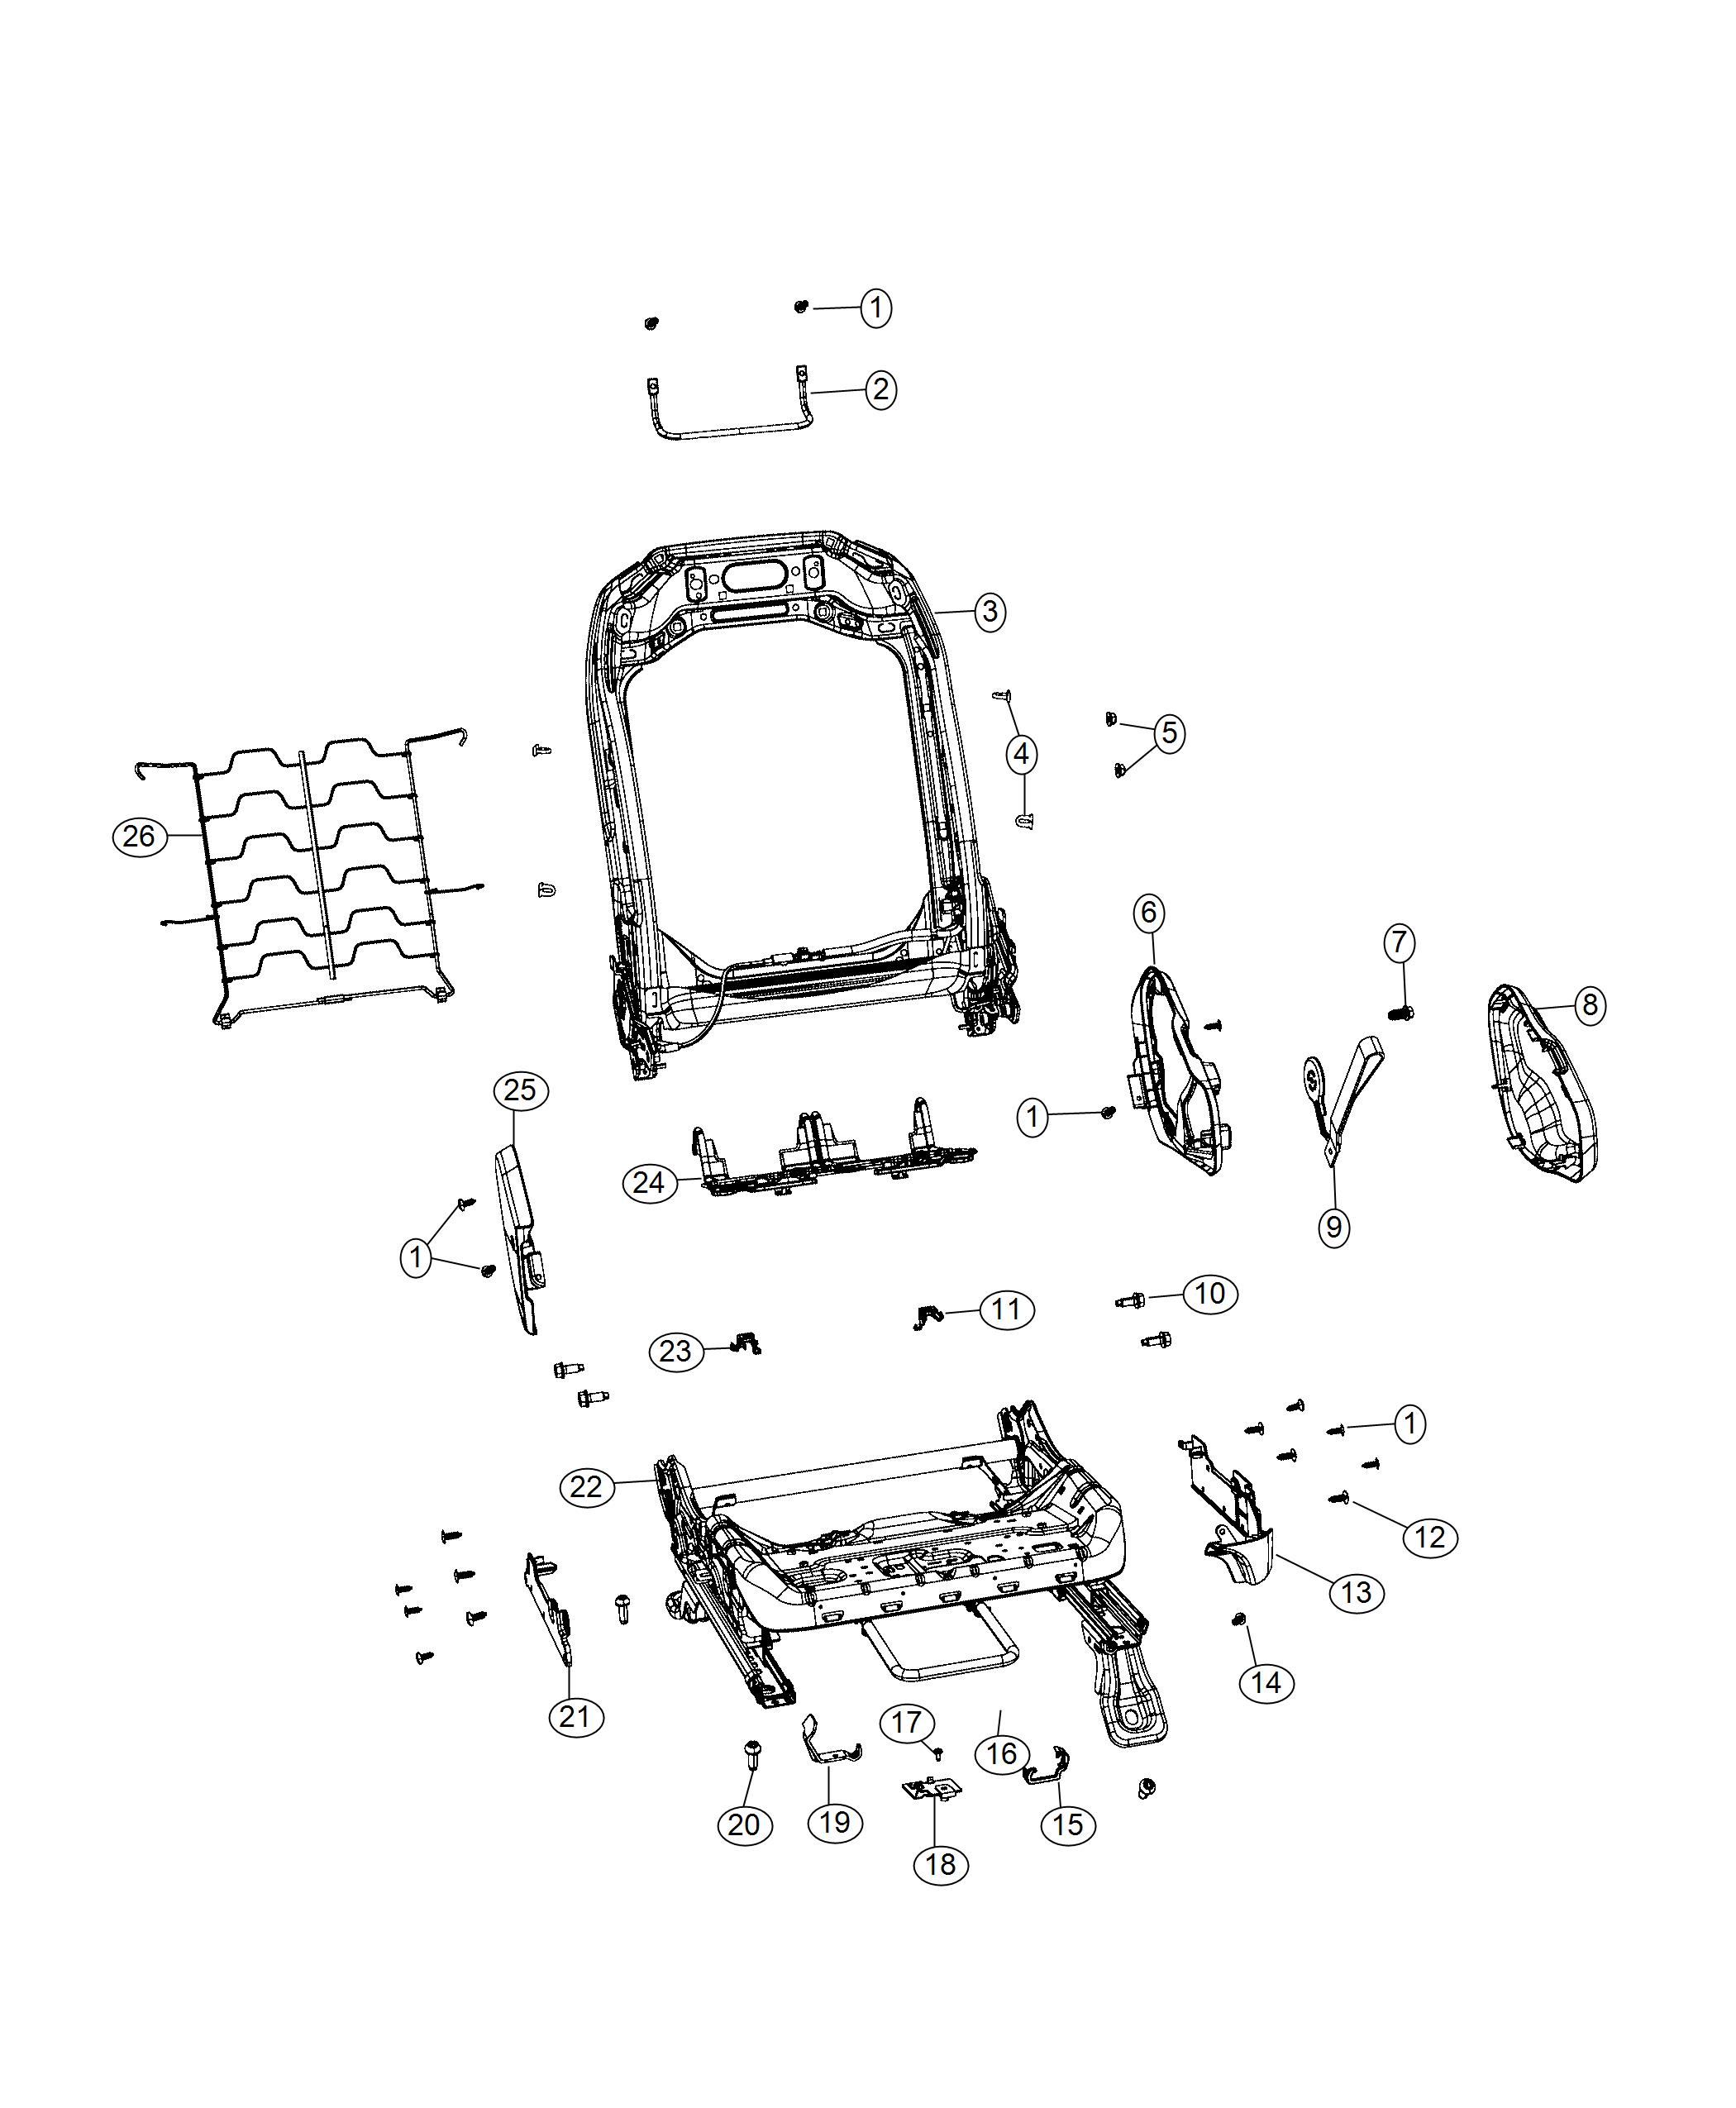 Diagram Adjusters, Recliners, Shields and Risers - Passenger Seat - 74 Body. for your Jeep Wrangler  